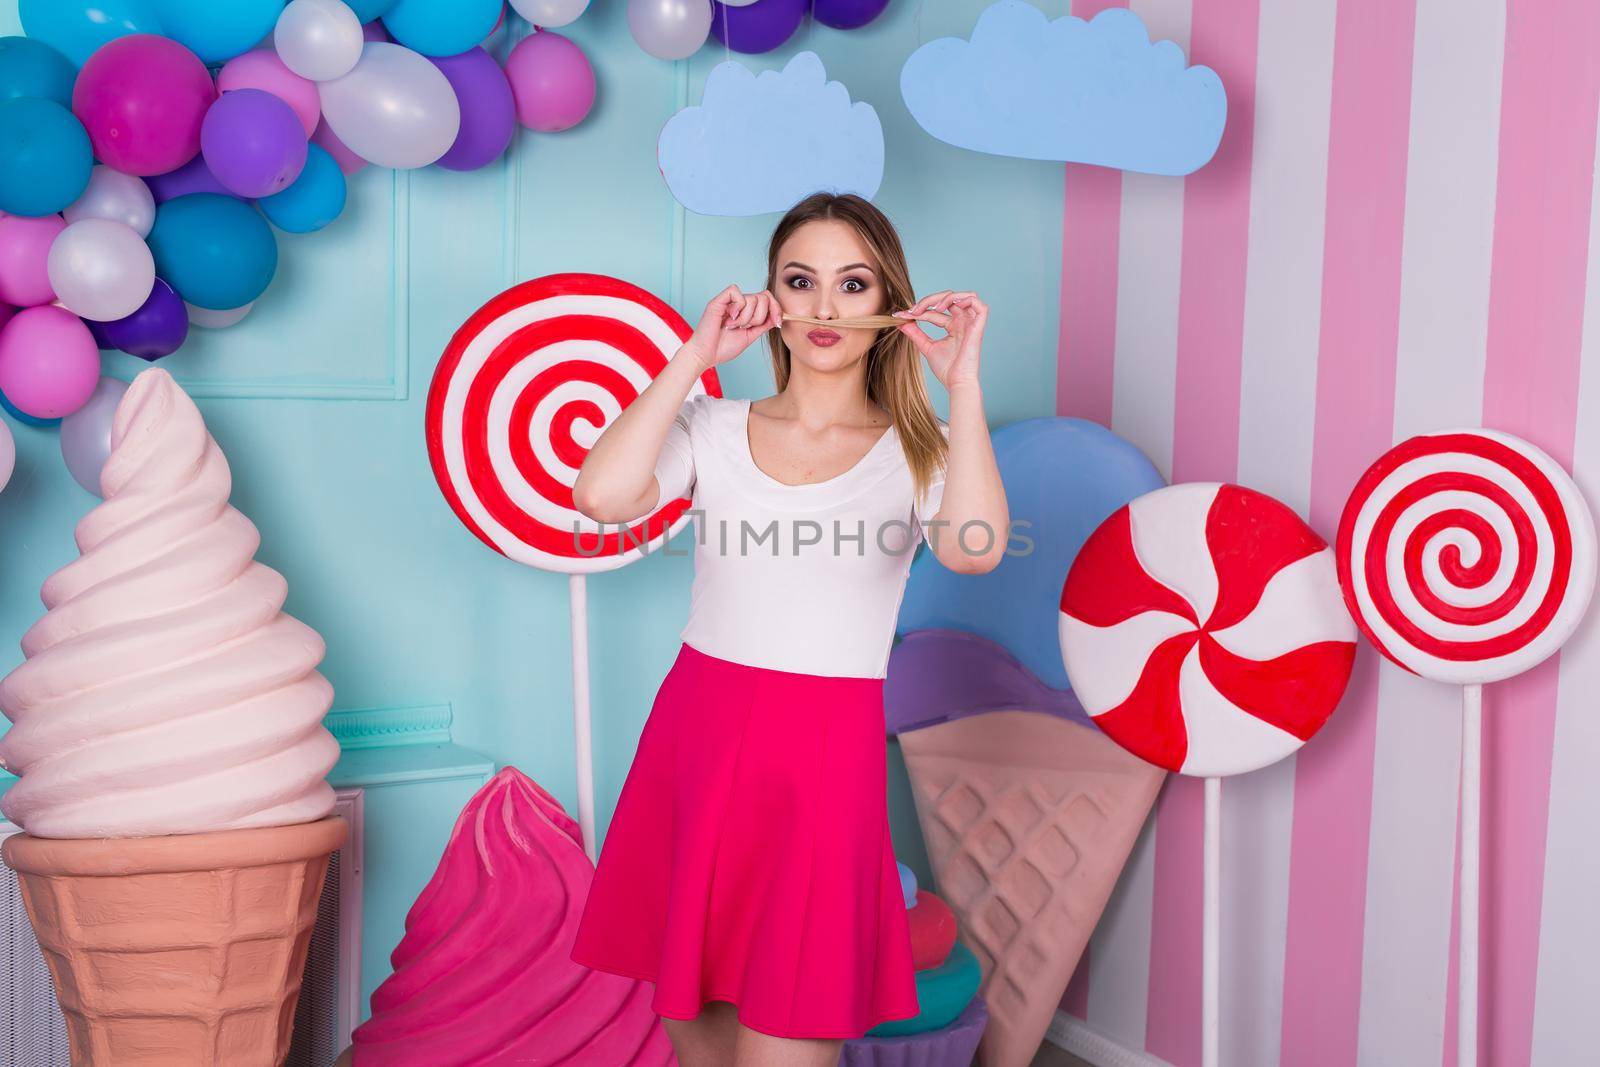 Portrait of joyful young woman in pink dress on background decorated with huge candies and ice cream.